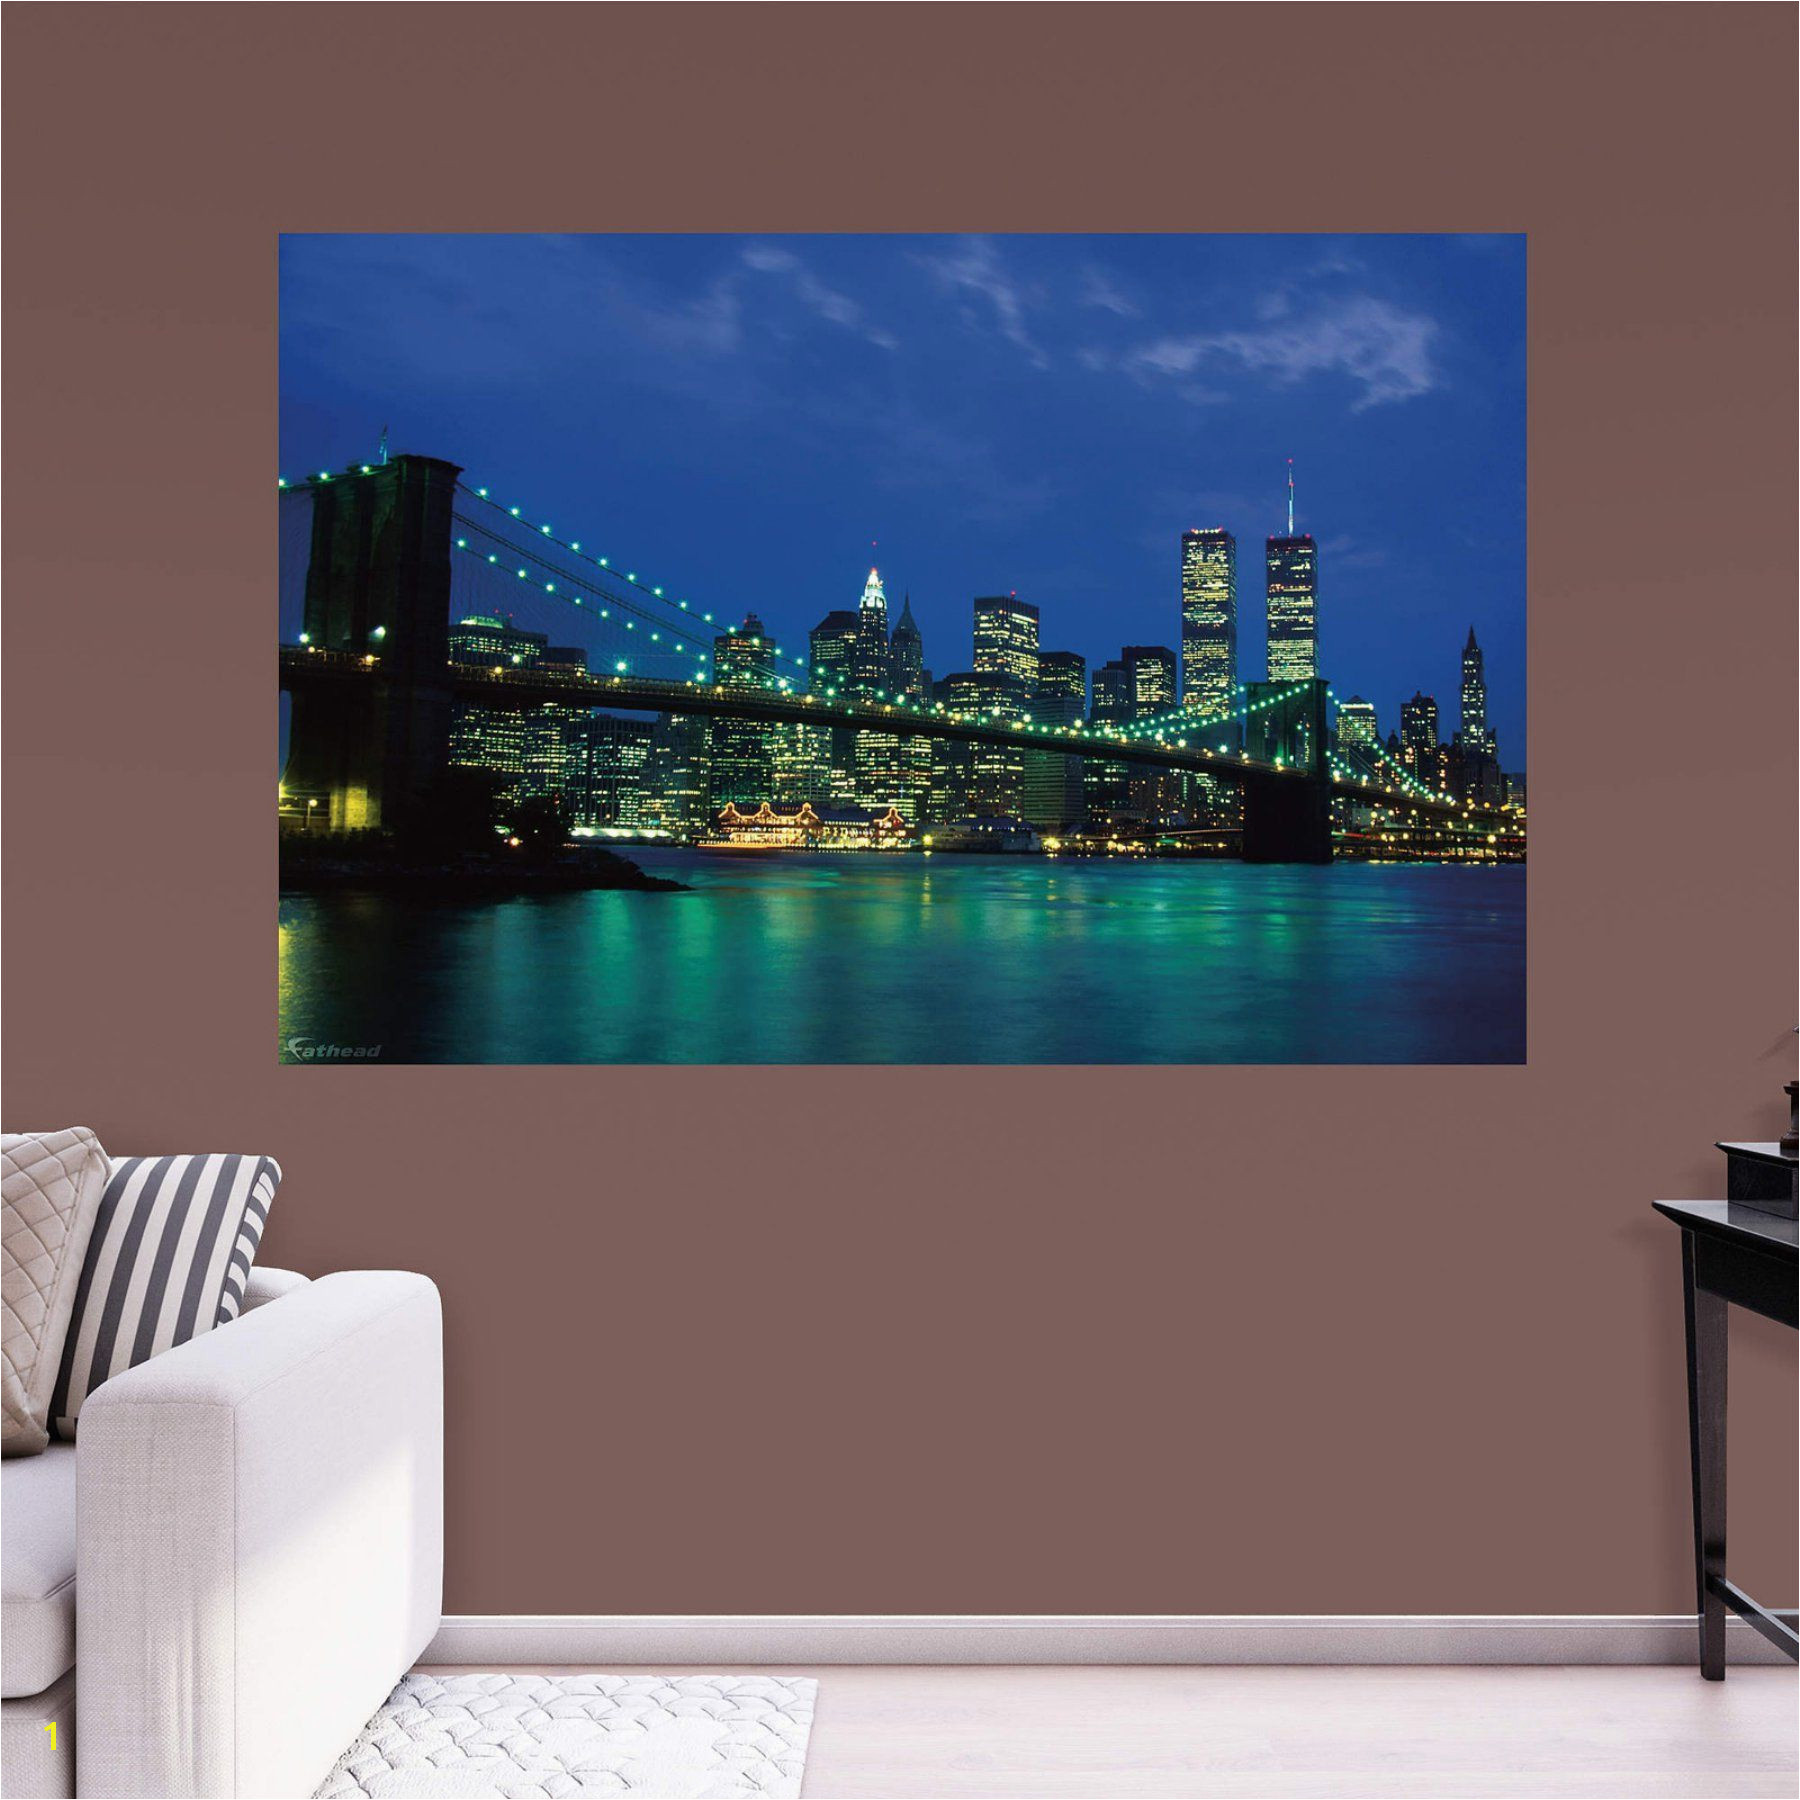 Fathead New York City Twin Towers Nightscape Wall Mural 69